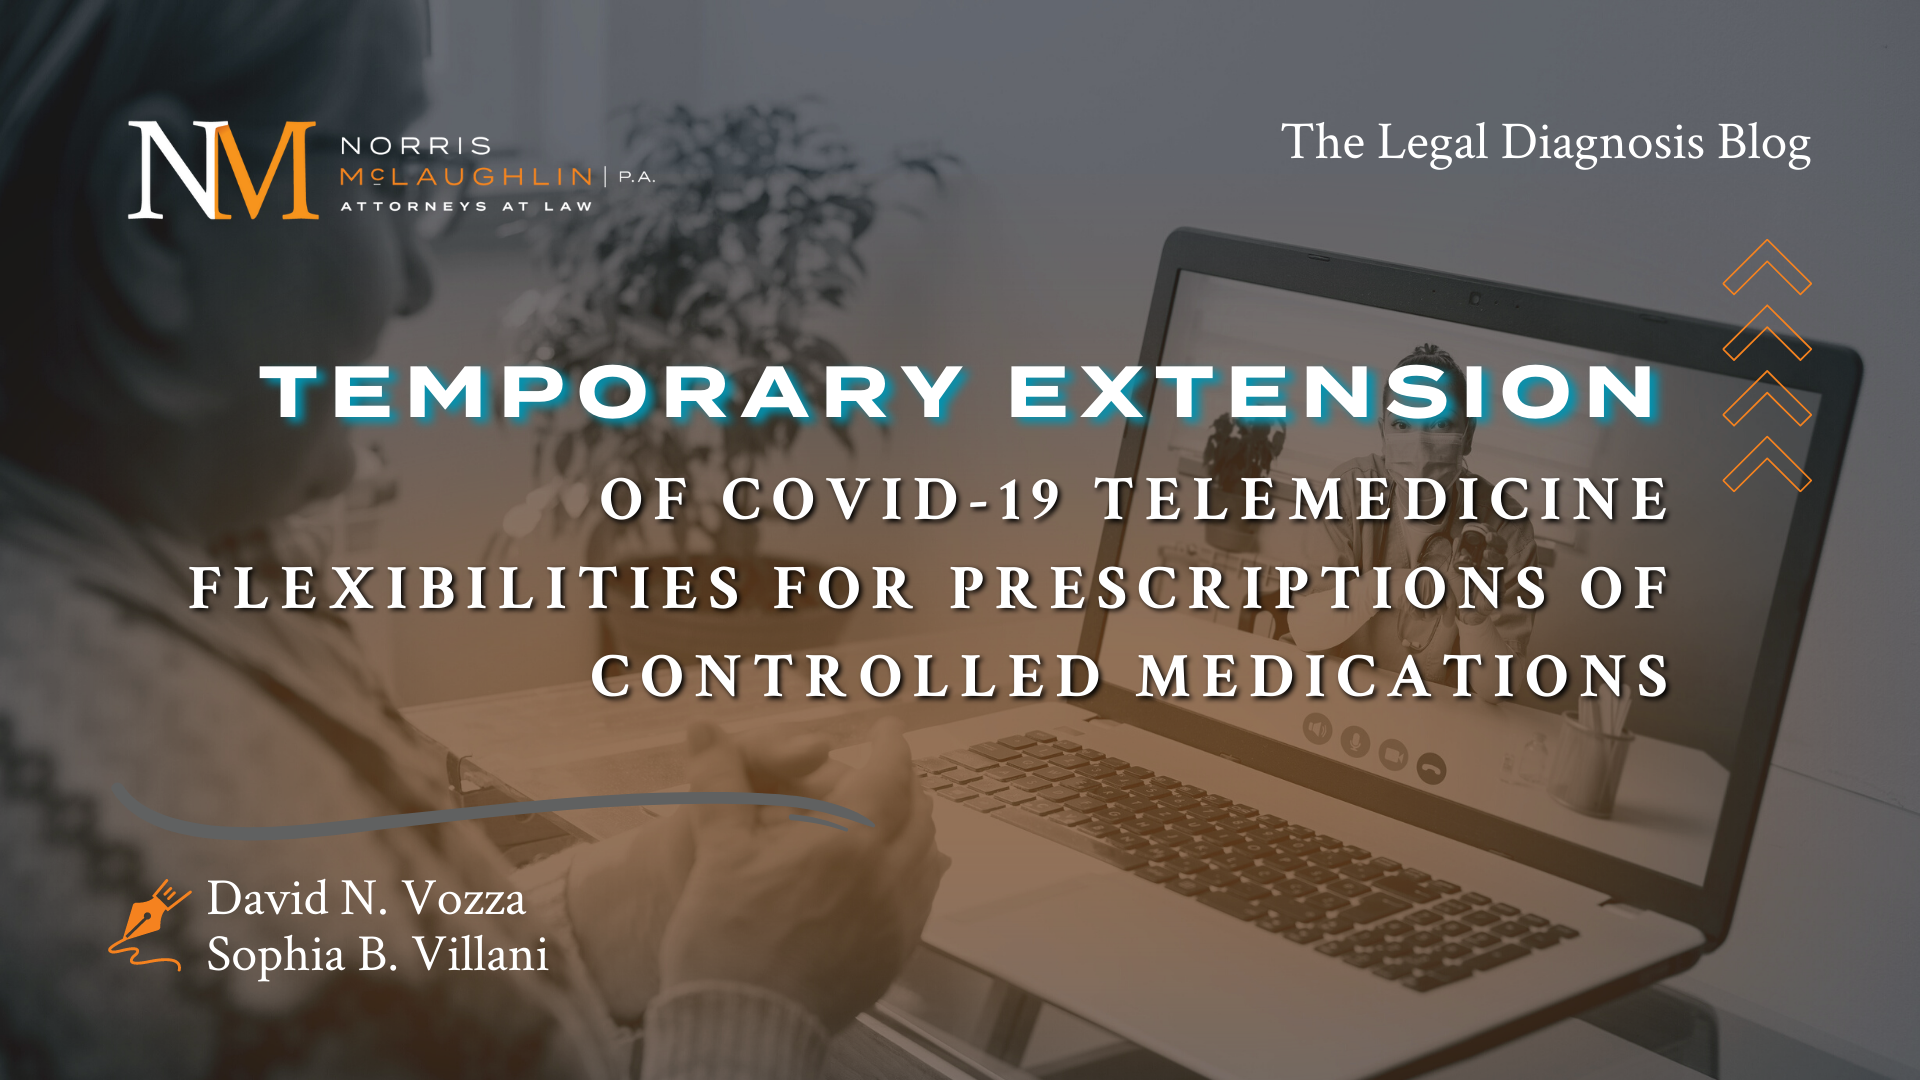 Temporary Extension of COVID-19 Telemedicine Flexibilities for Prescriptions of Controlled Medications